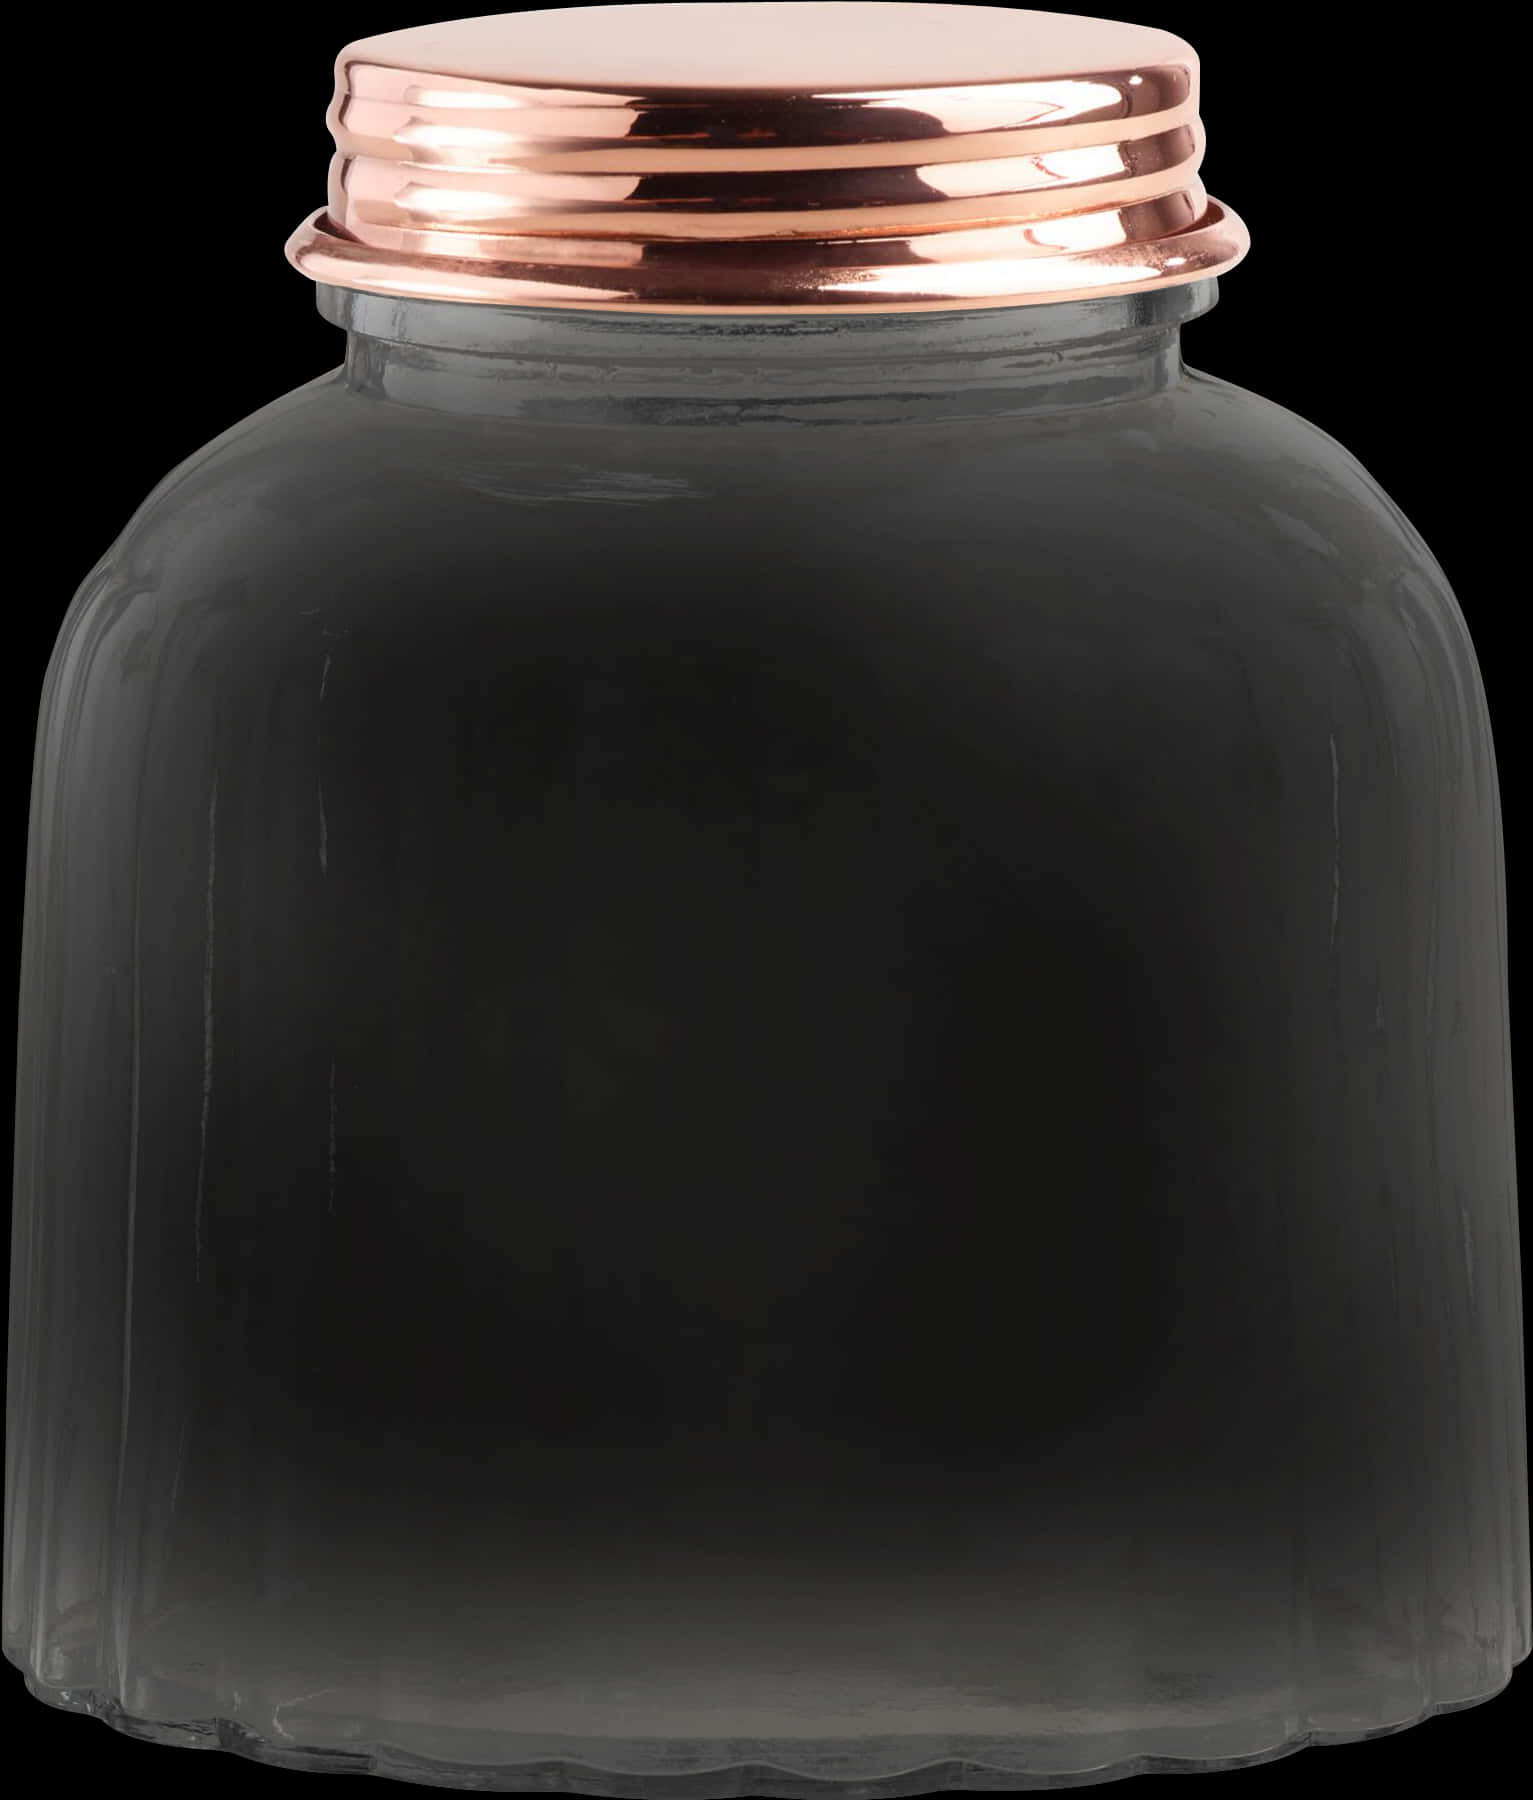 A Glass Jar With A Copper Top